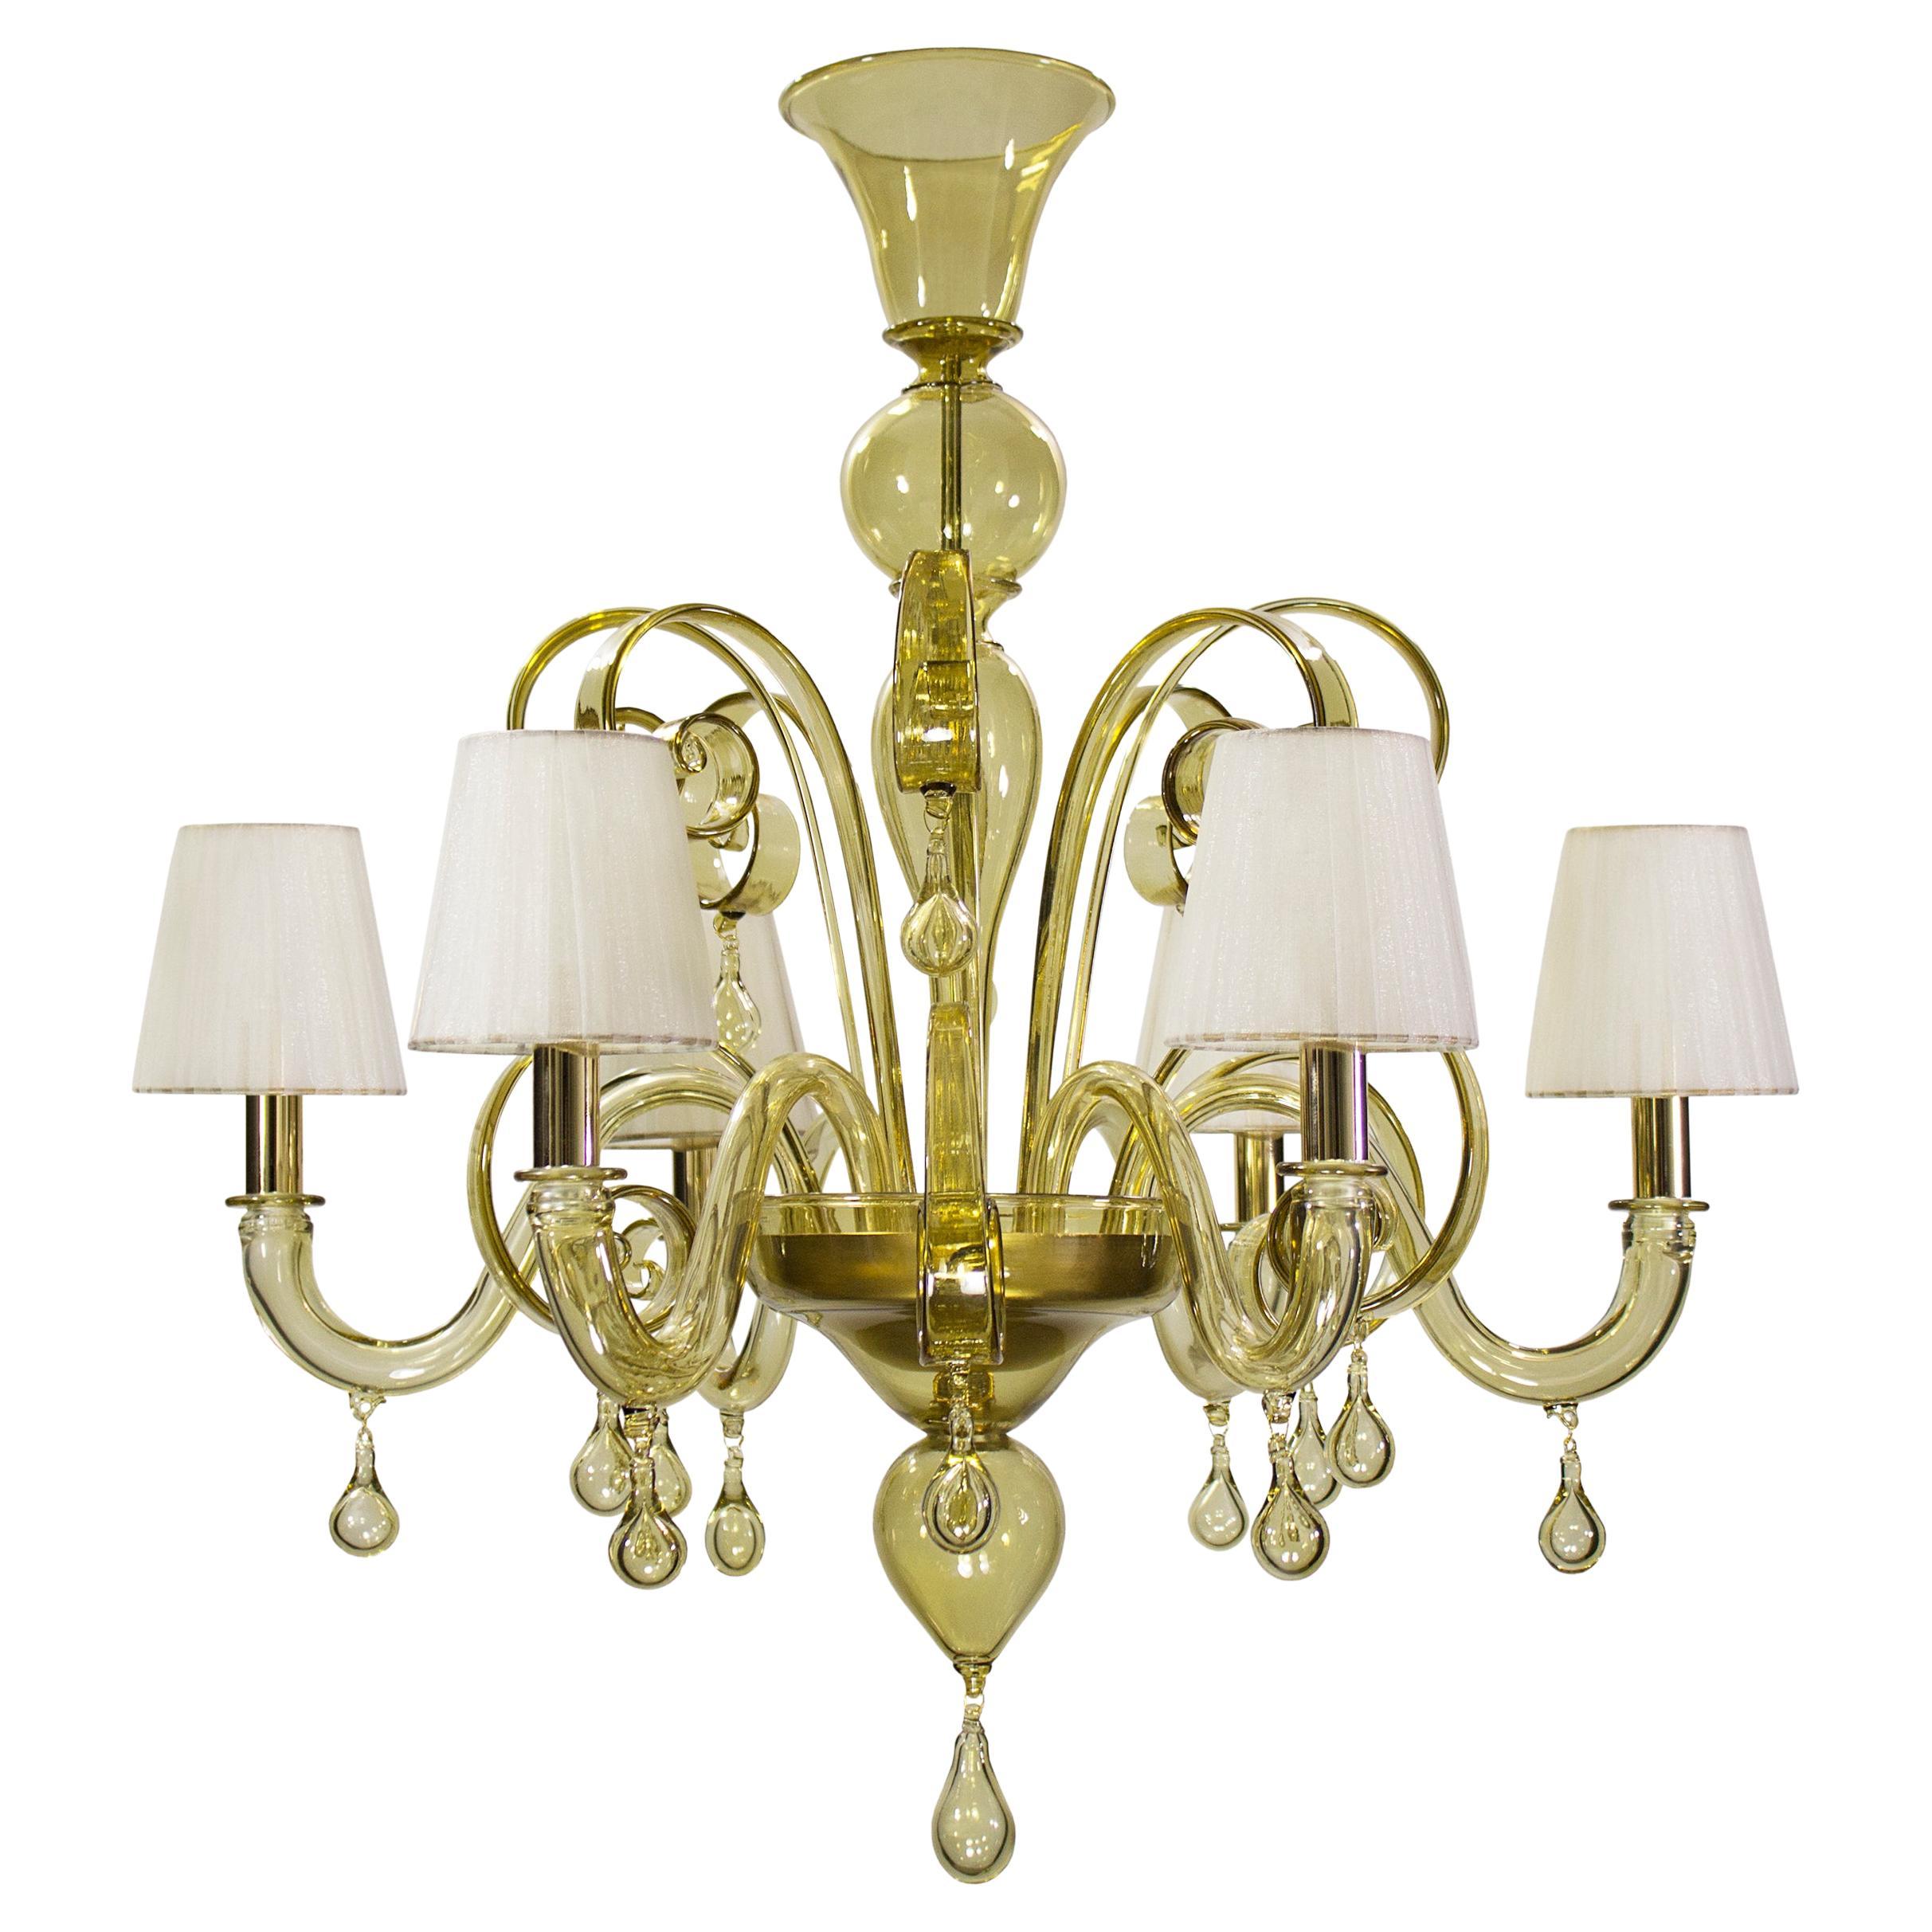 Italian Chandelier 6 Arms Smooth Straw Murano Glass and Lampshades by Multiforme